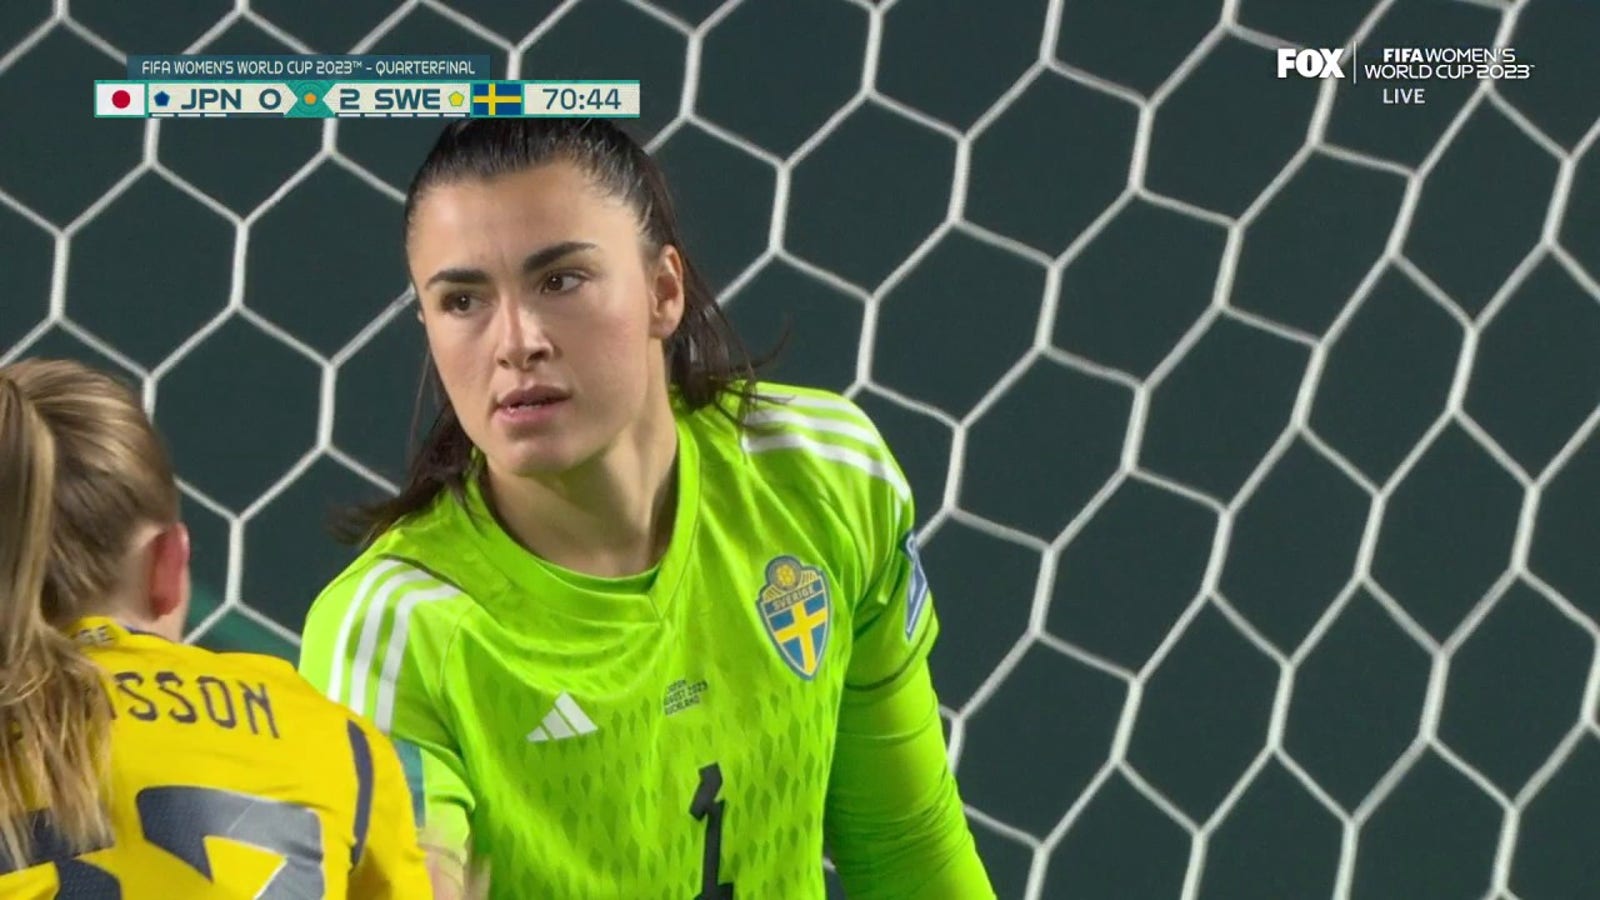 Jezira Musovic saves a shot on goal to give Japan a 2-0 lead against Sweden.